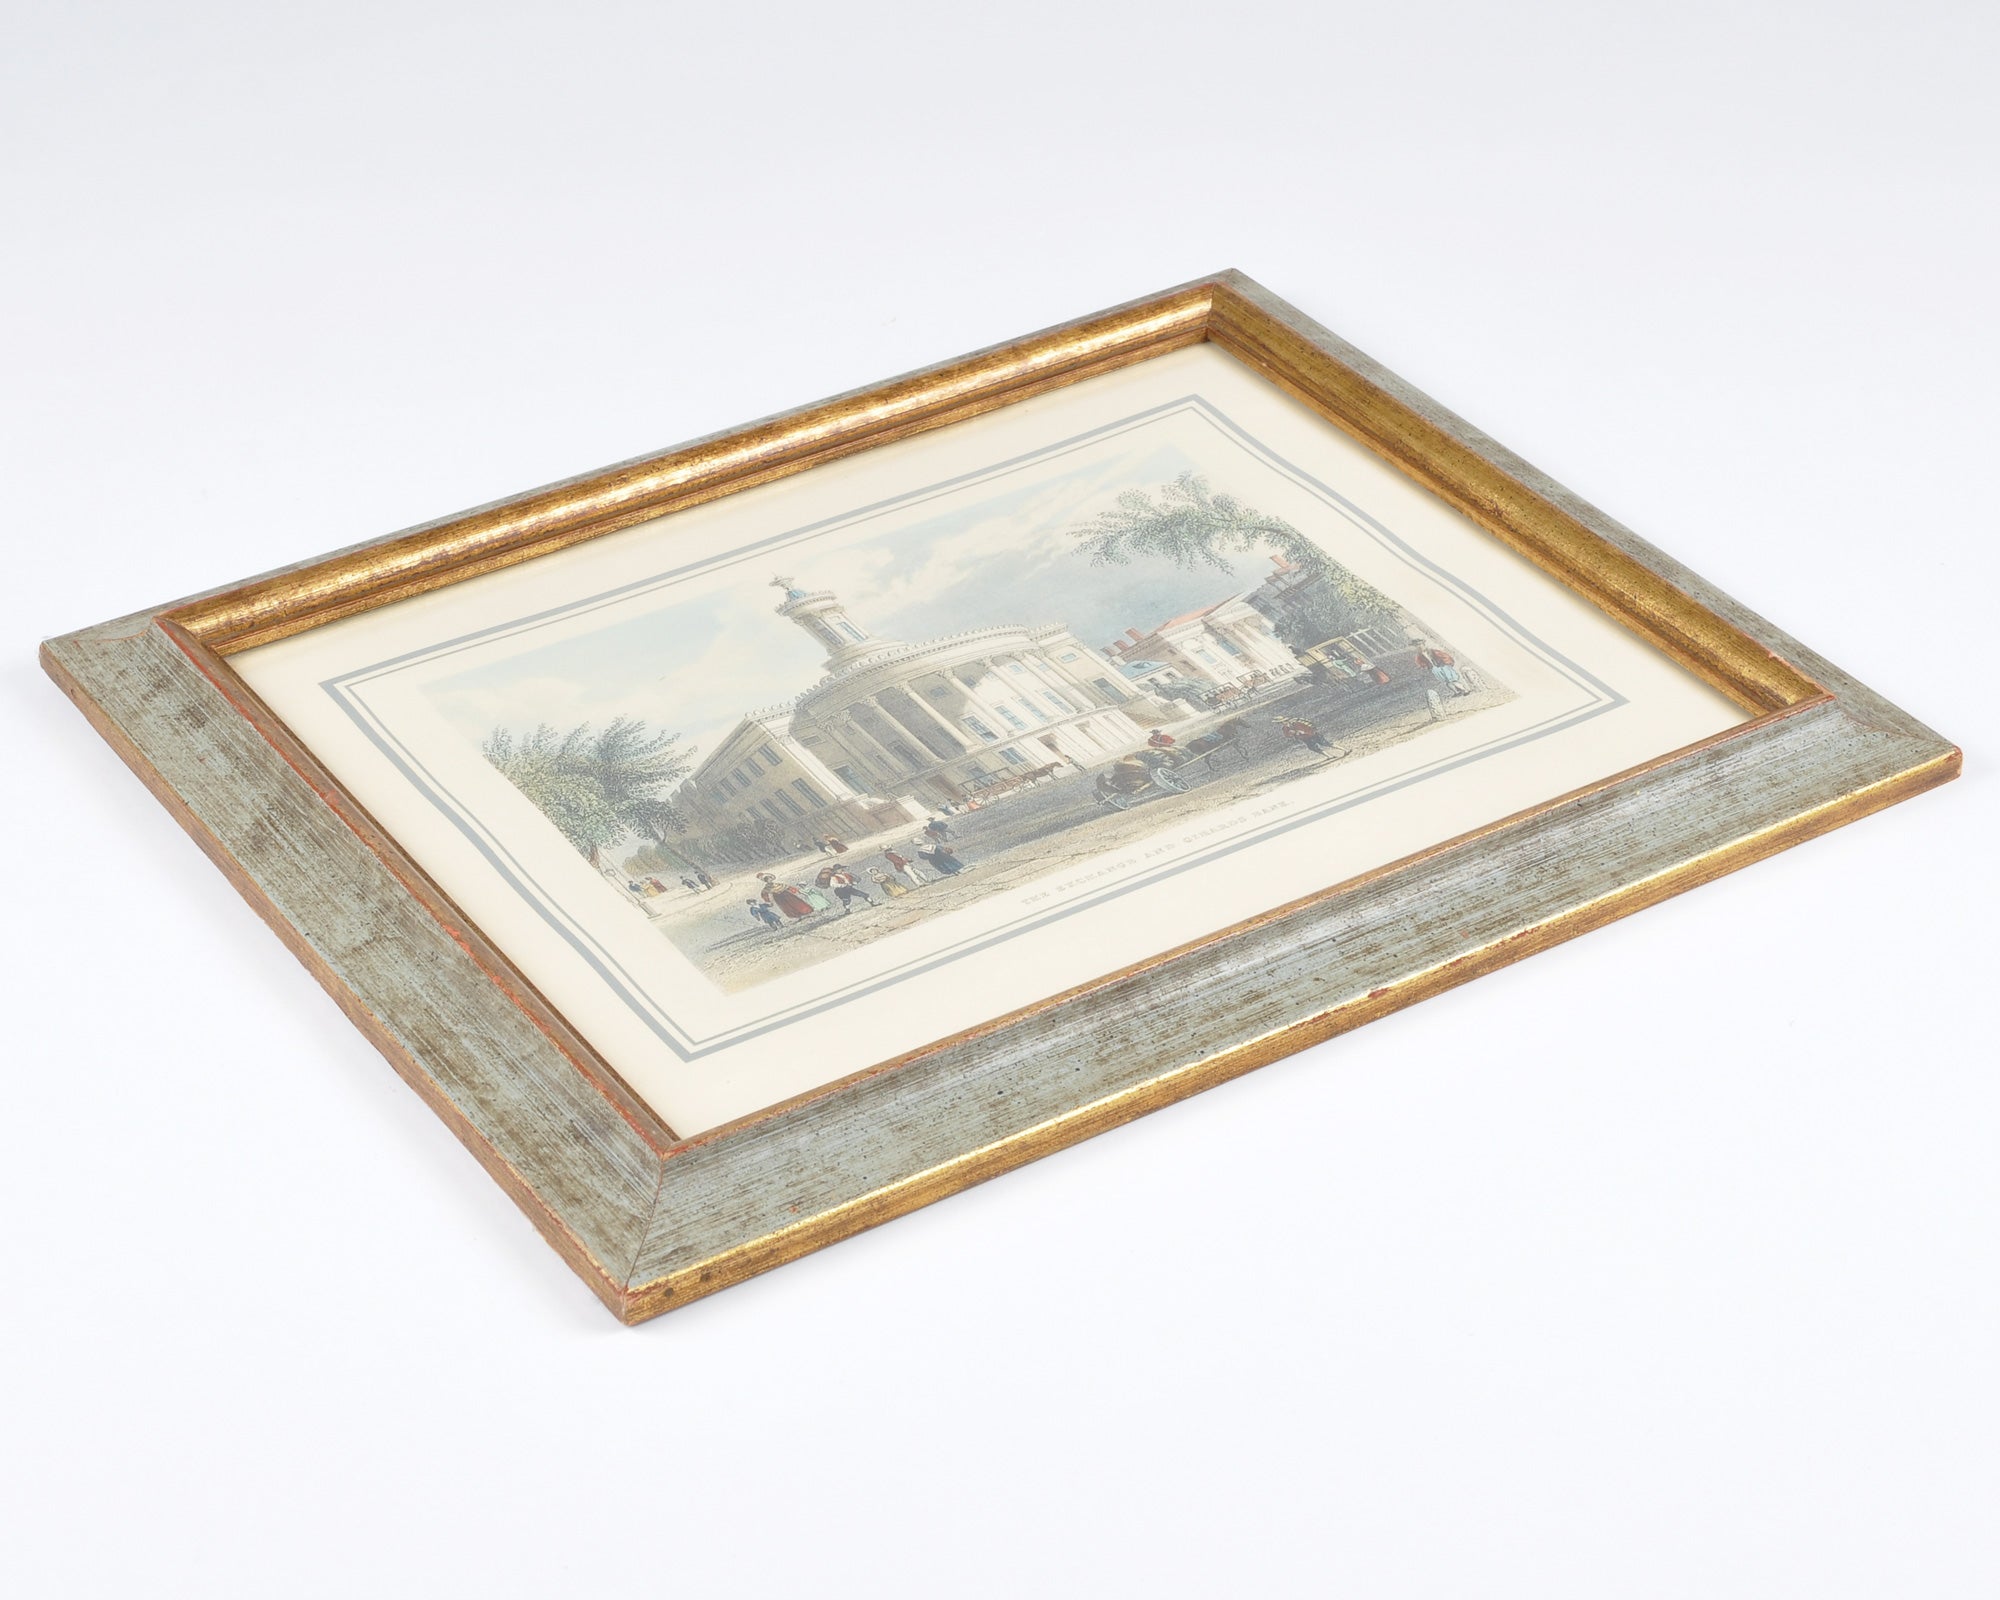 Vintage Framed Art-1838 W.H. Bartlett/Griffith Faneuil "The Exchange and Girard’s Bank-Hand Colored Engraving-Gift for Art Collector Tamara Scott Designs